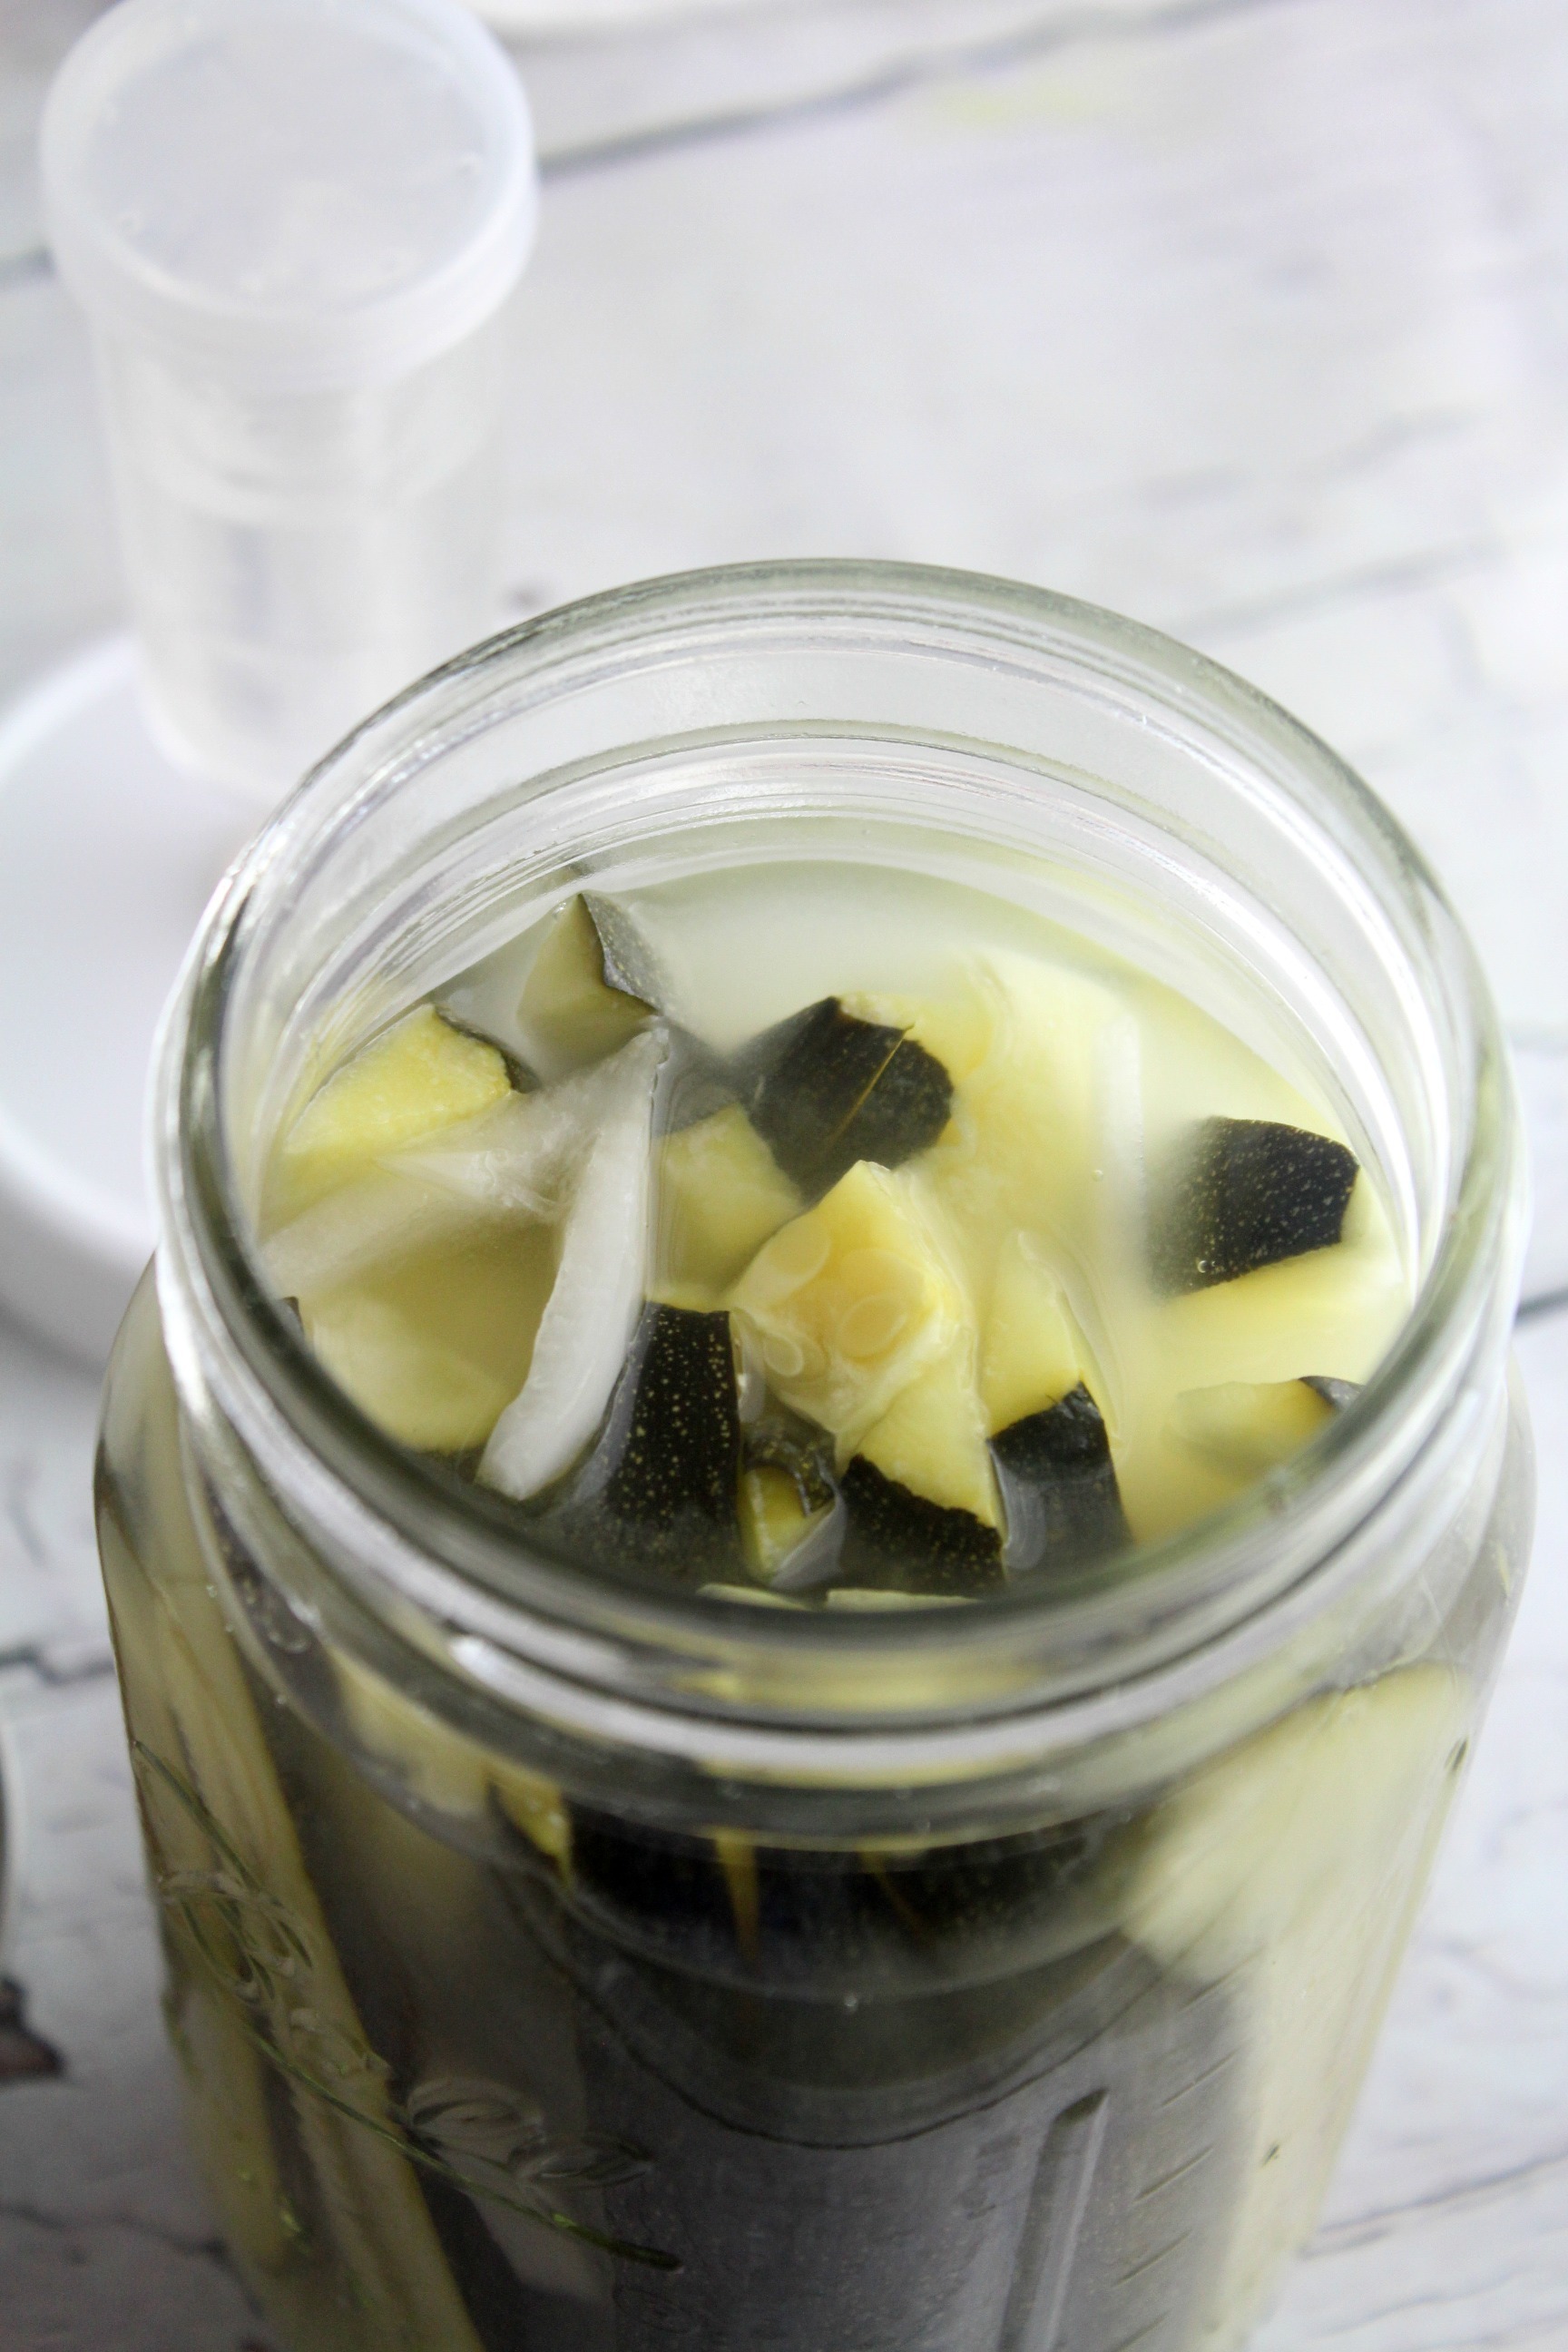 Instead of pickling, opt for lacto-fermented zucchini - it's healthy, delicious and amazing for gut health!